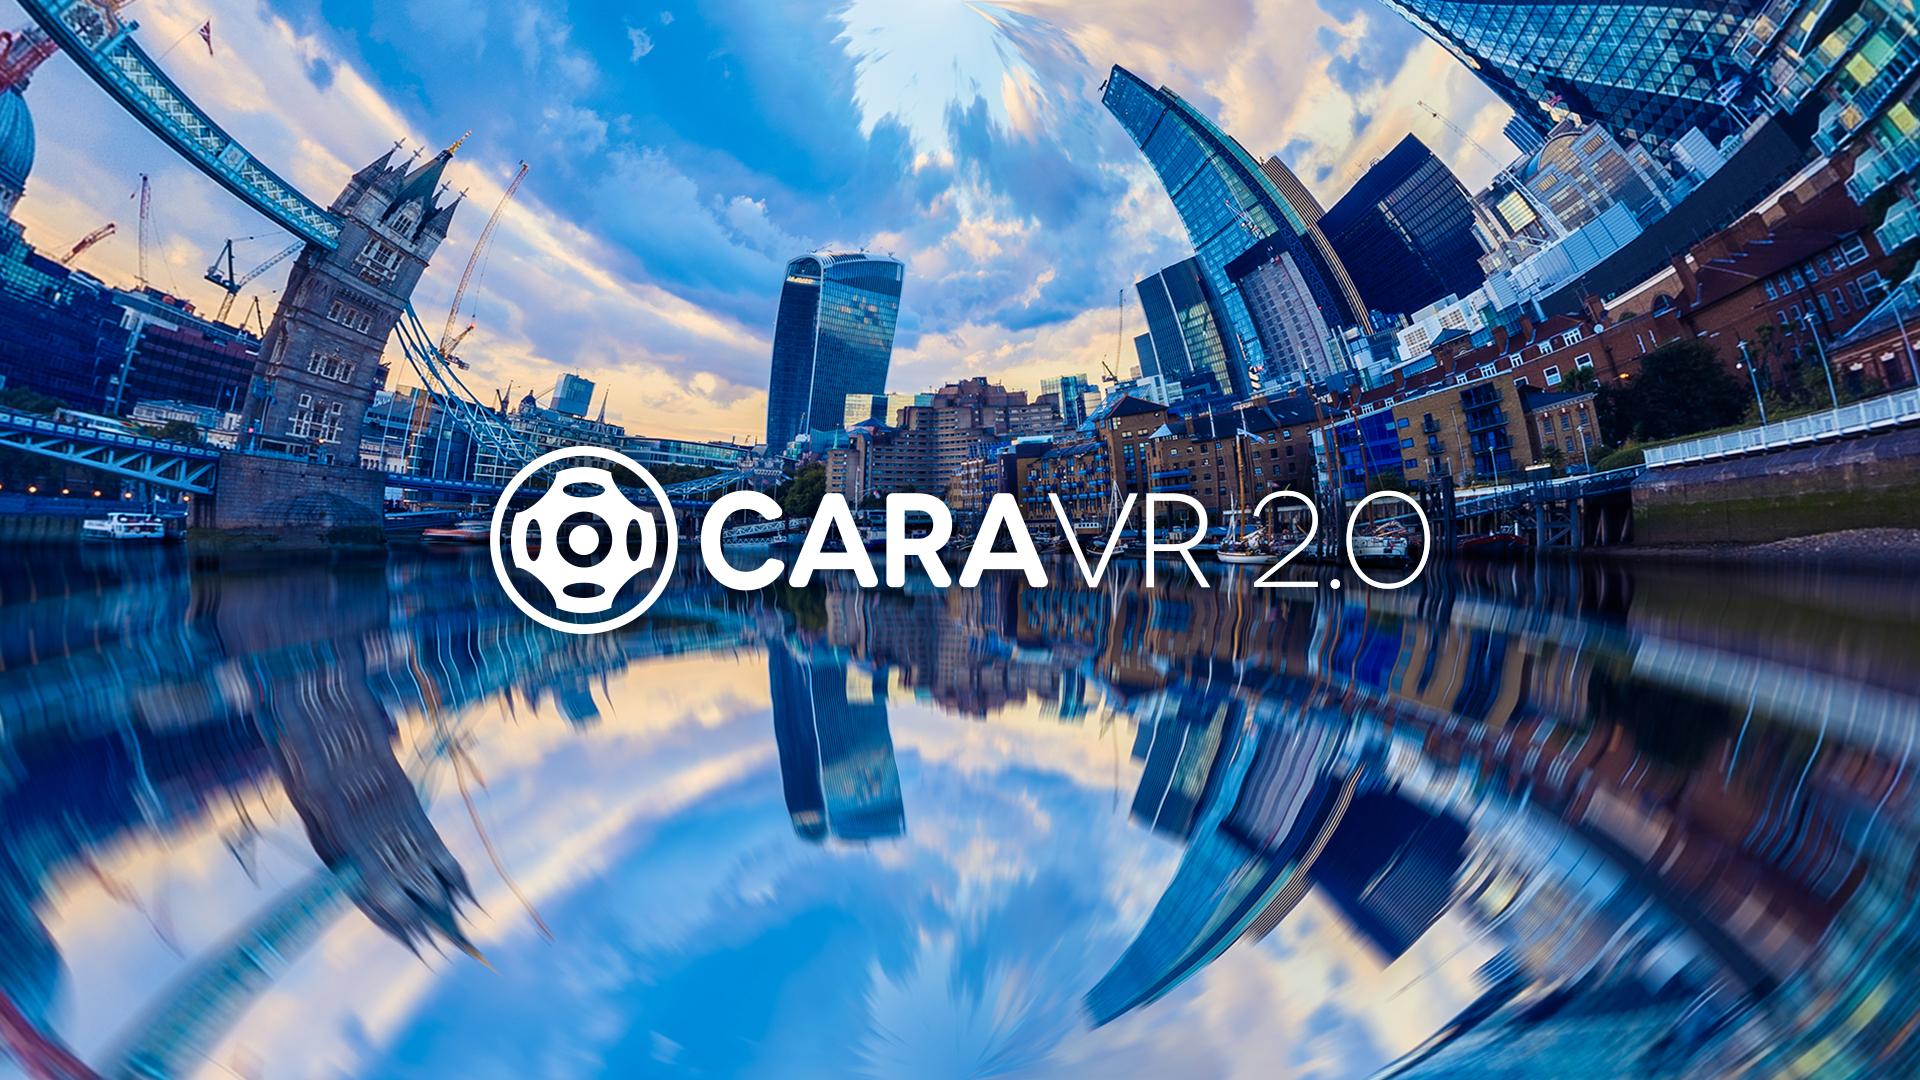 New release Cara VR 2.0 